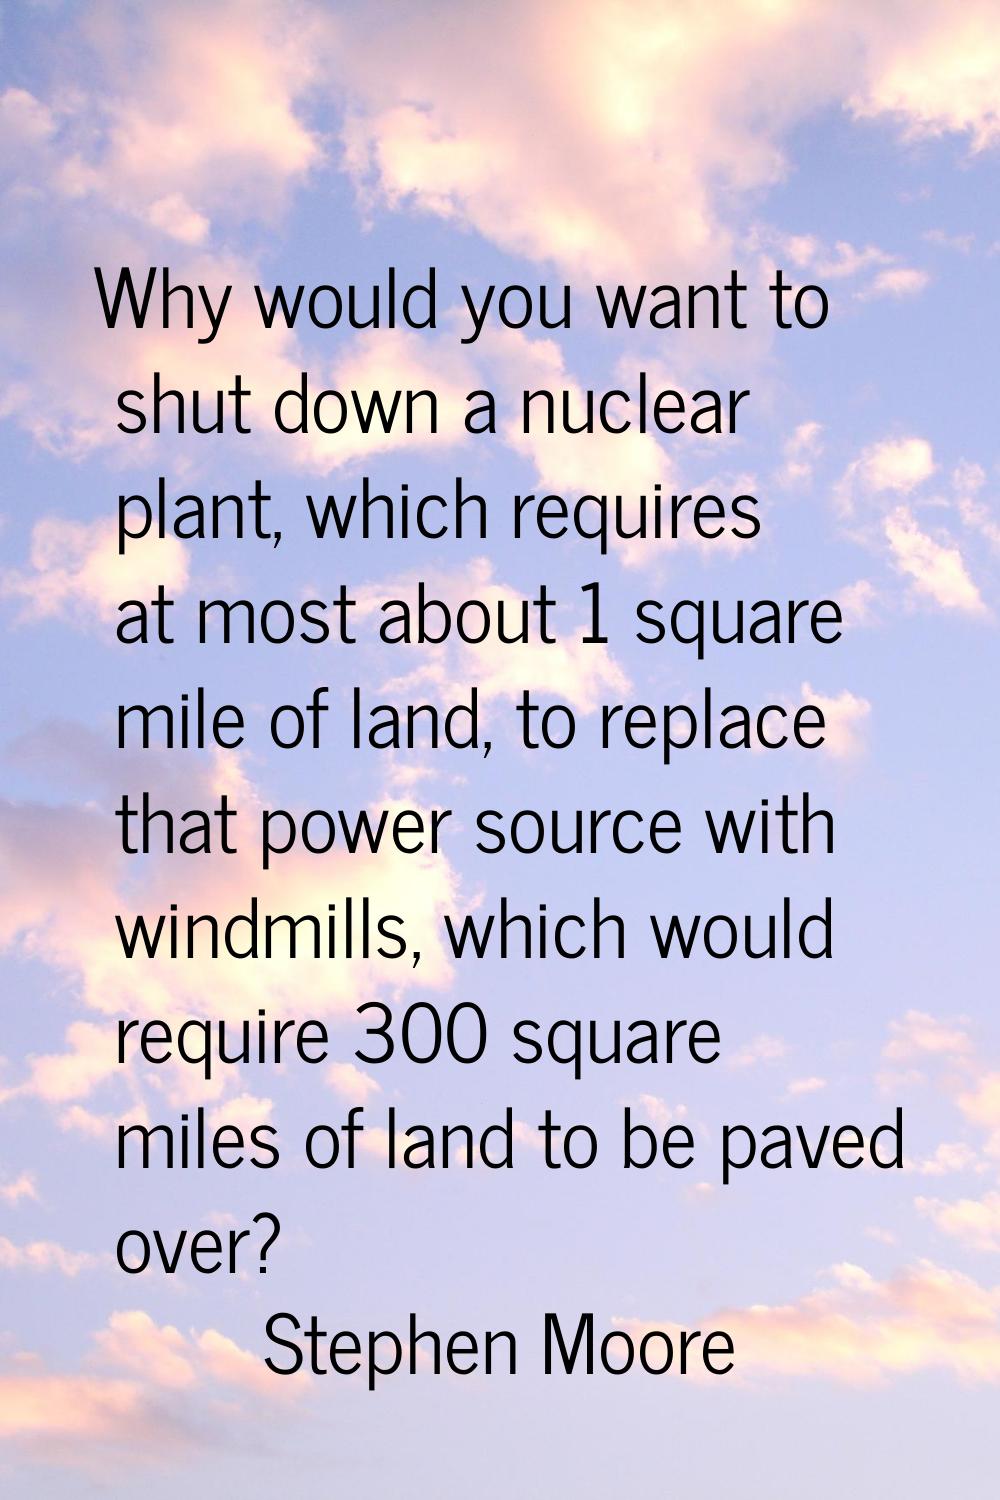 Why would you want to shut down a nuclear plant, which requires at most about 1 square mile of land